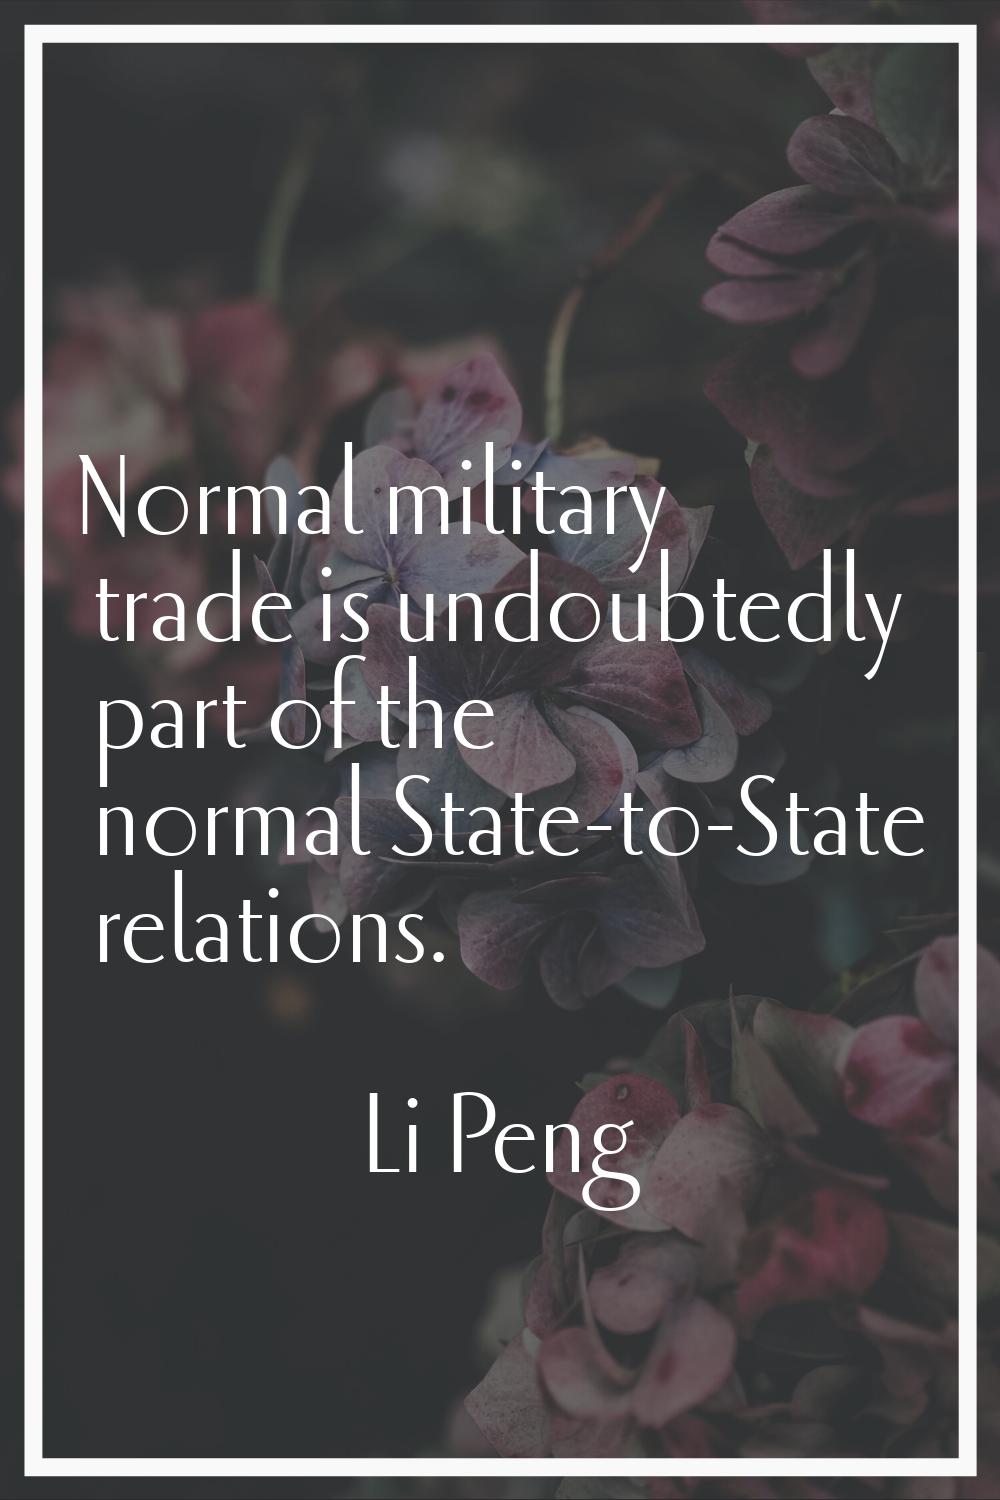 Normal military trade is undoubtedly part of the normal State-to-State relations.